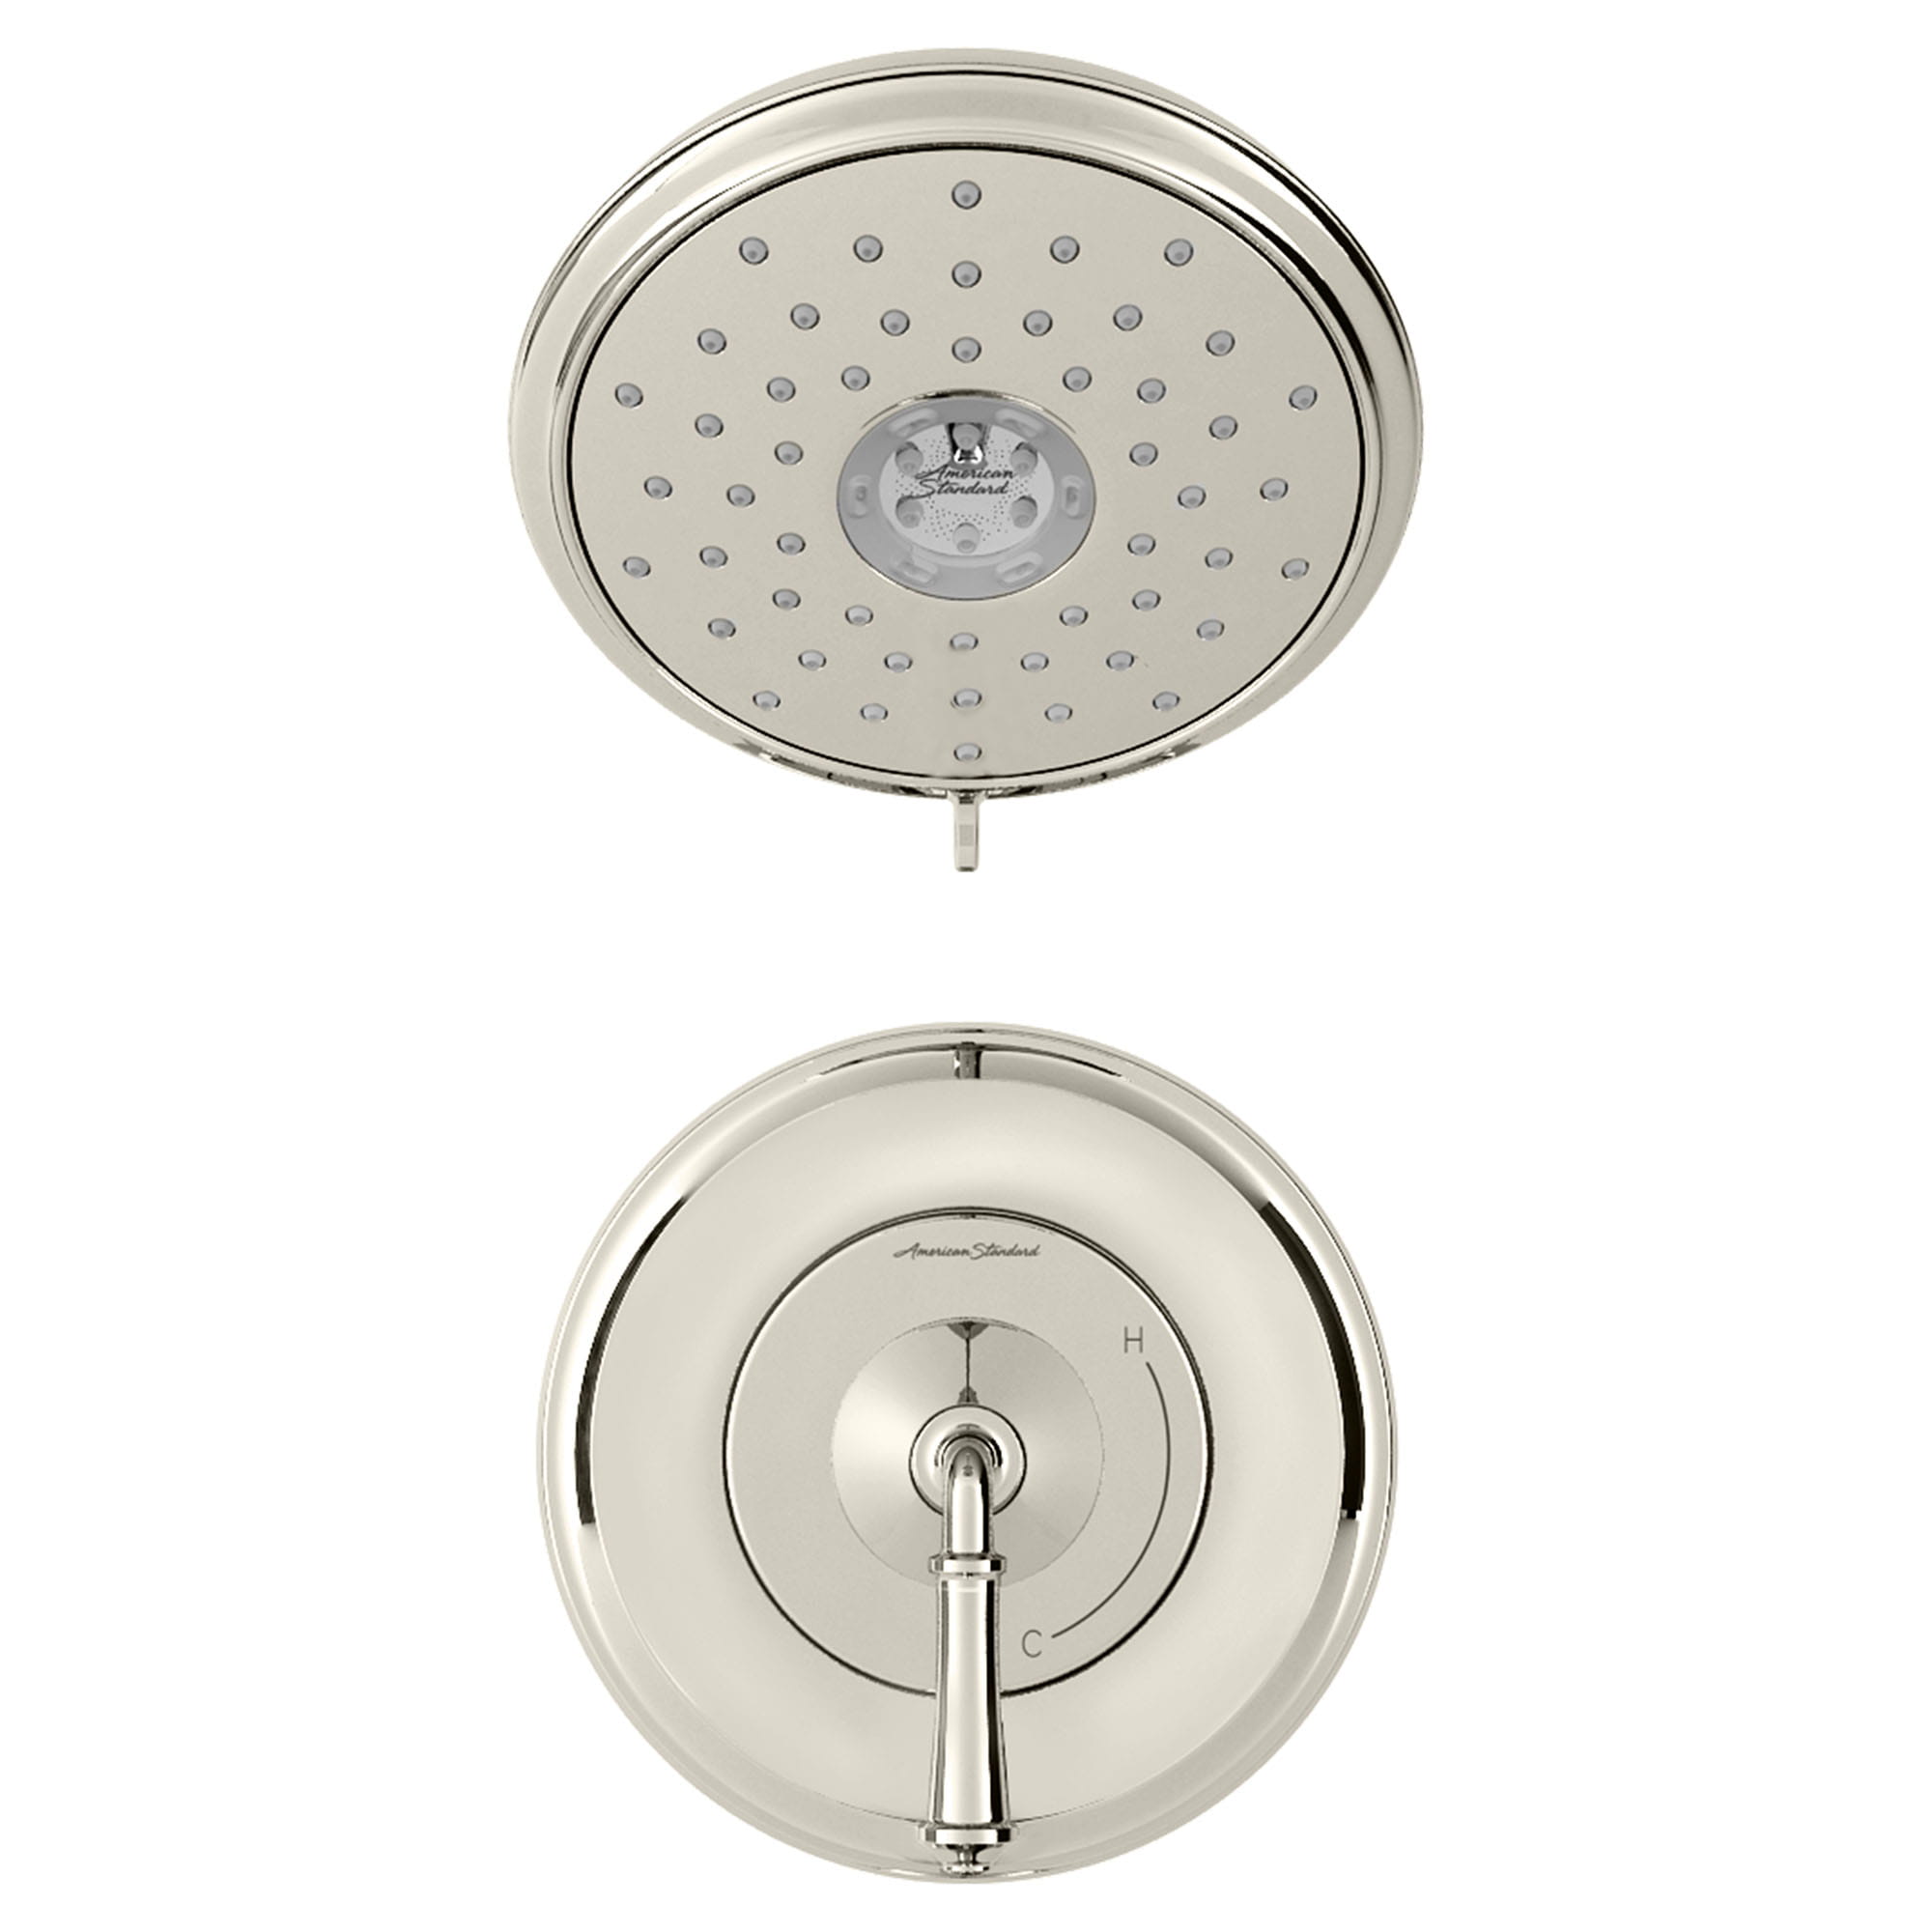 Delancey 25 gpm 94 L min Shower Trim Kit With 4 Function Showerhead and Lever Handle POLISHED  NICKEL